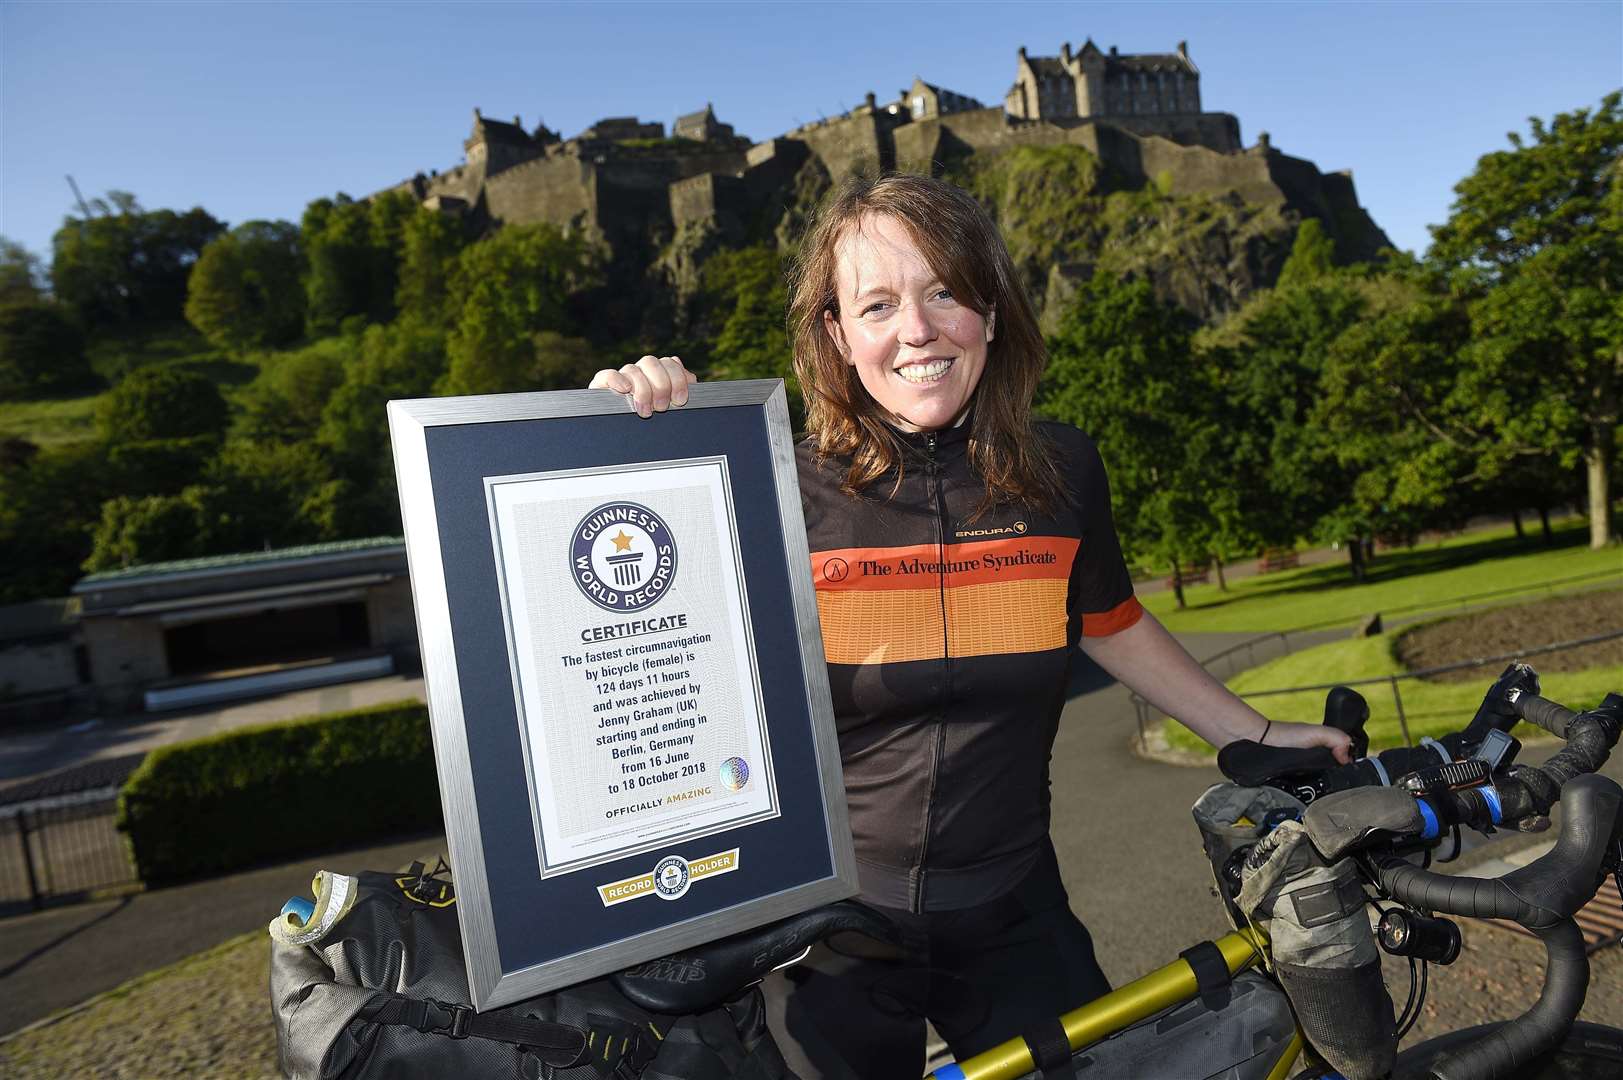 Jenny Graham in 2019, with her Guinness World Records title for the fastest circumnavigation by bicycle (female)